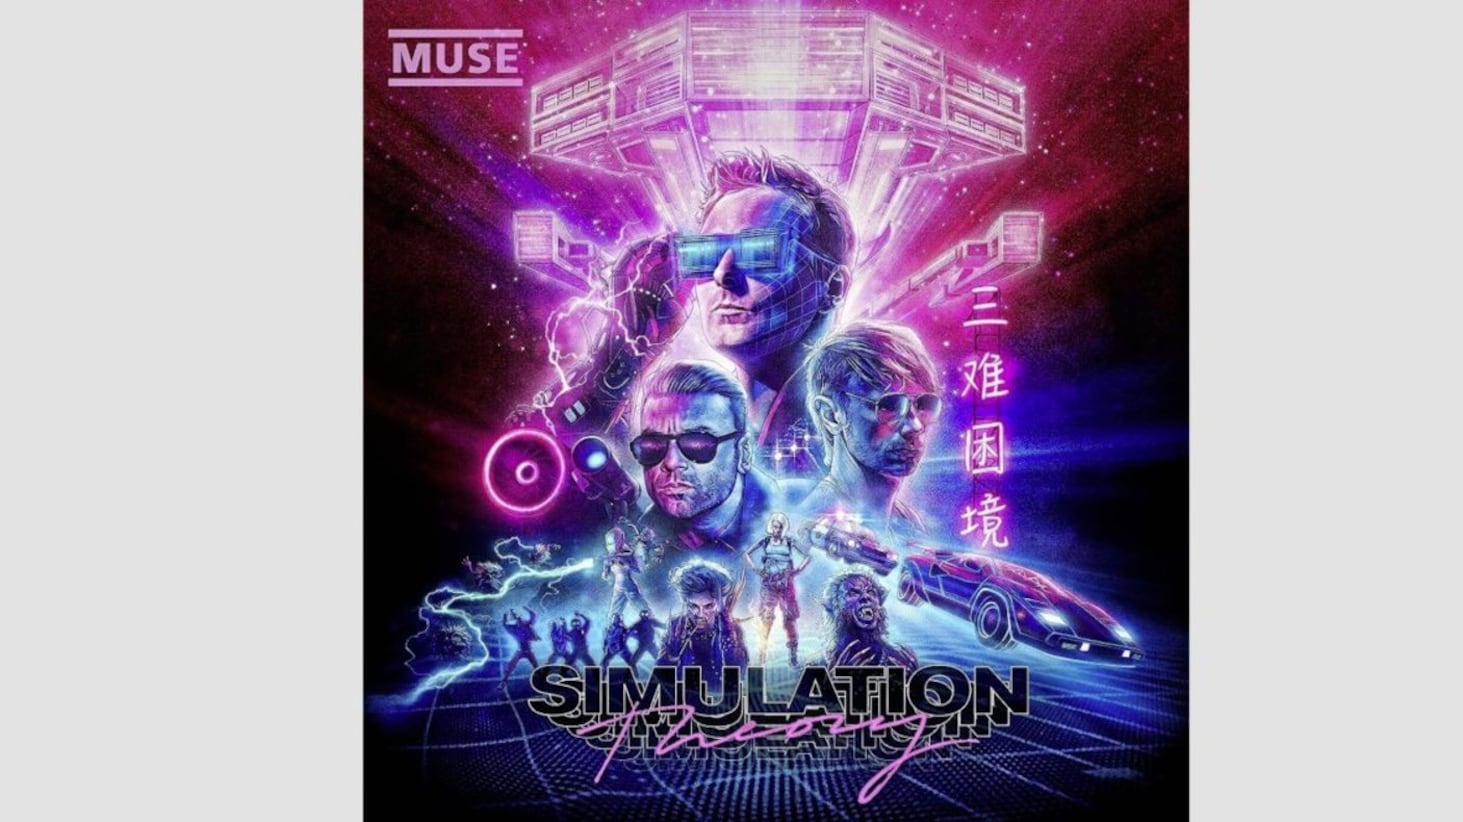 The new Muse album Simulation Theory 